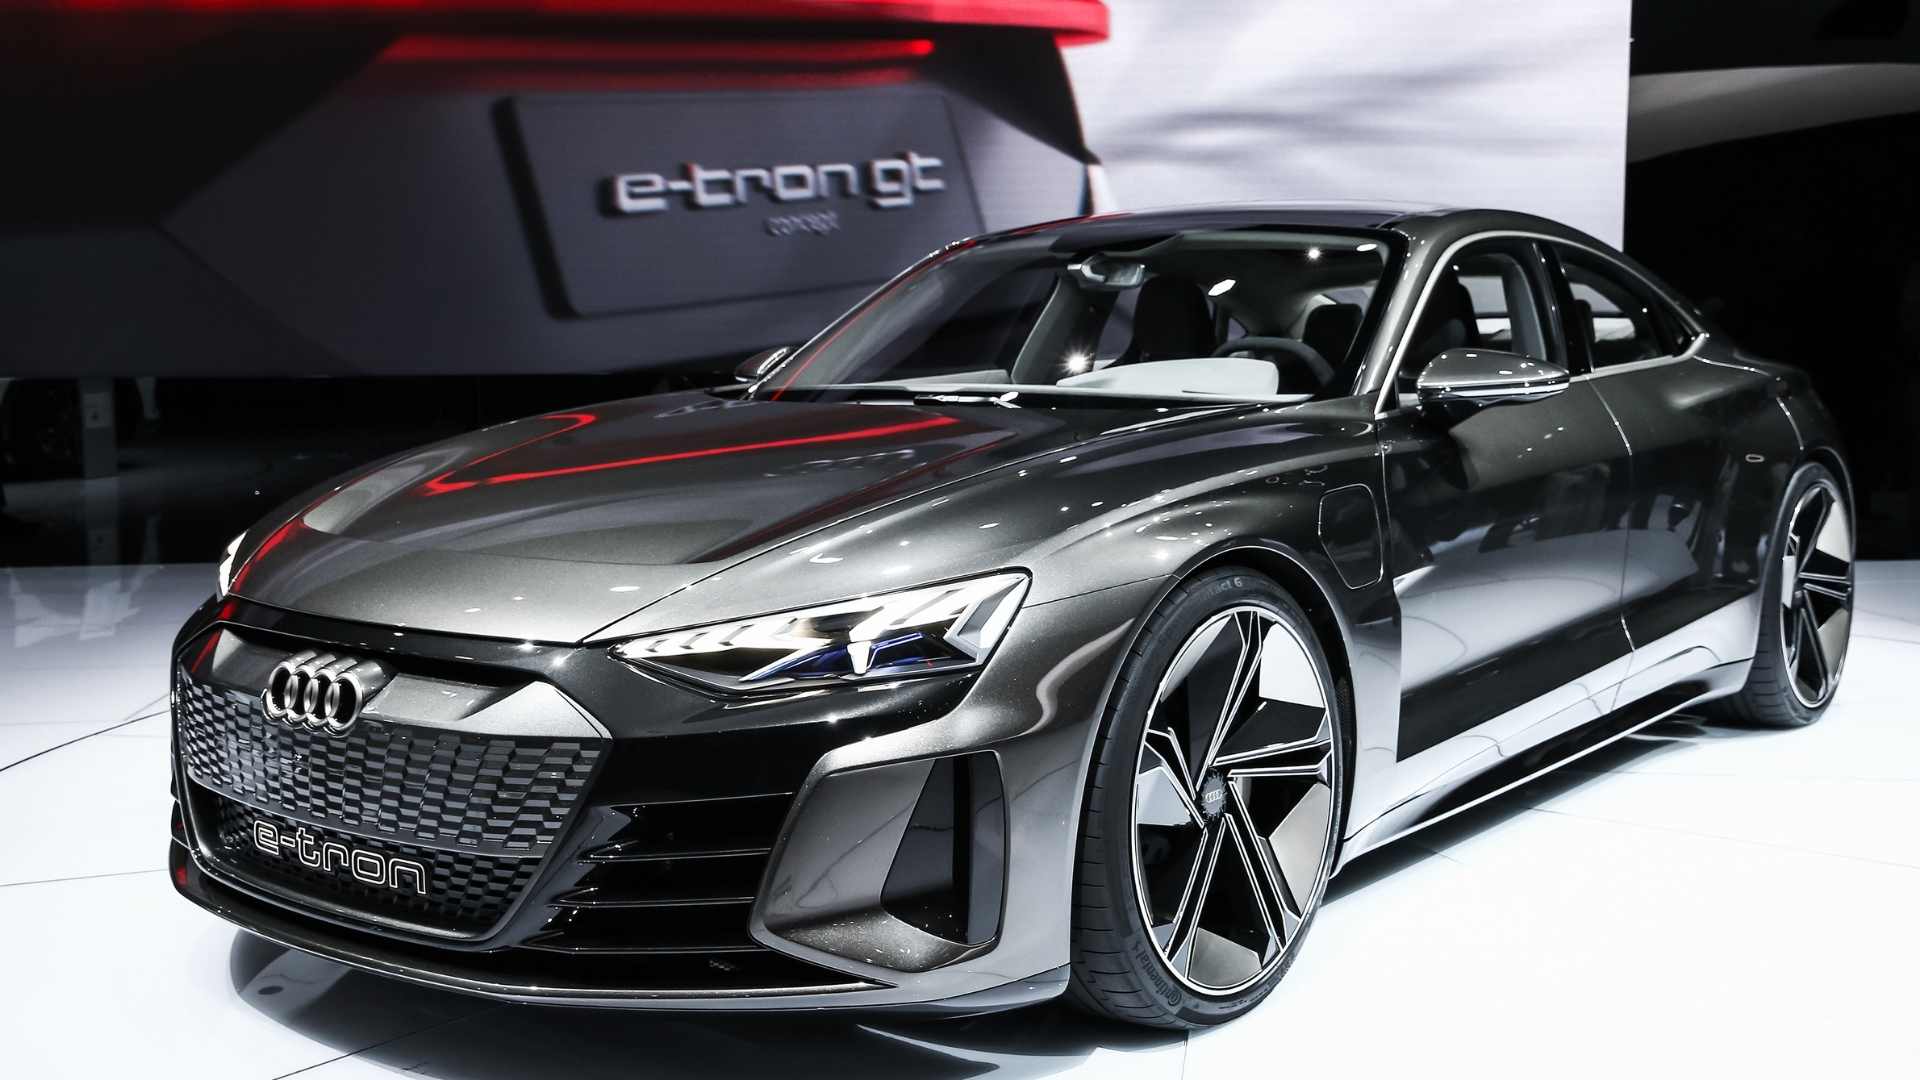 Comparison of the e-tron GT and Tesla Model S